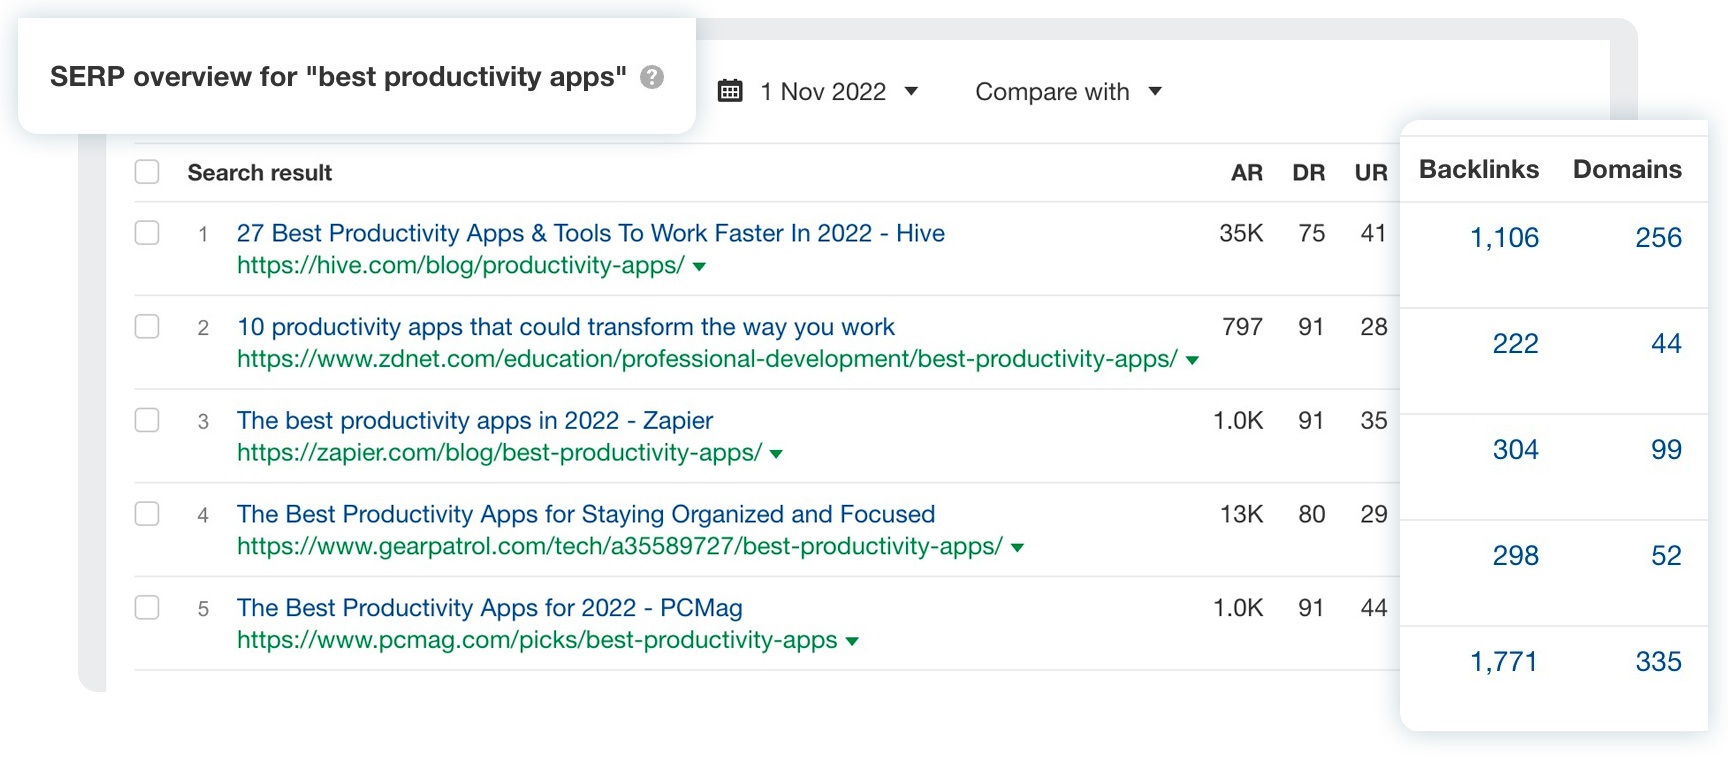 SERP overview for "best productivity apps"